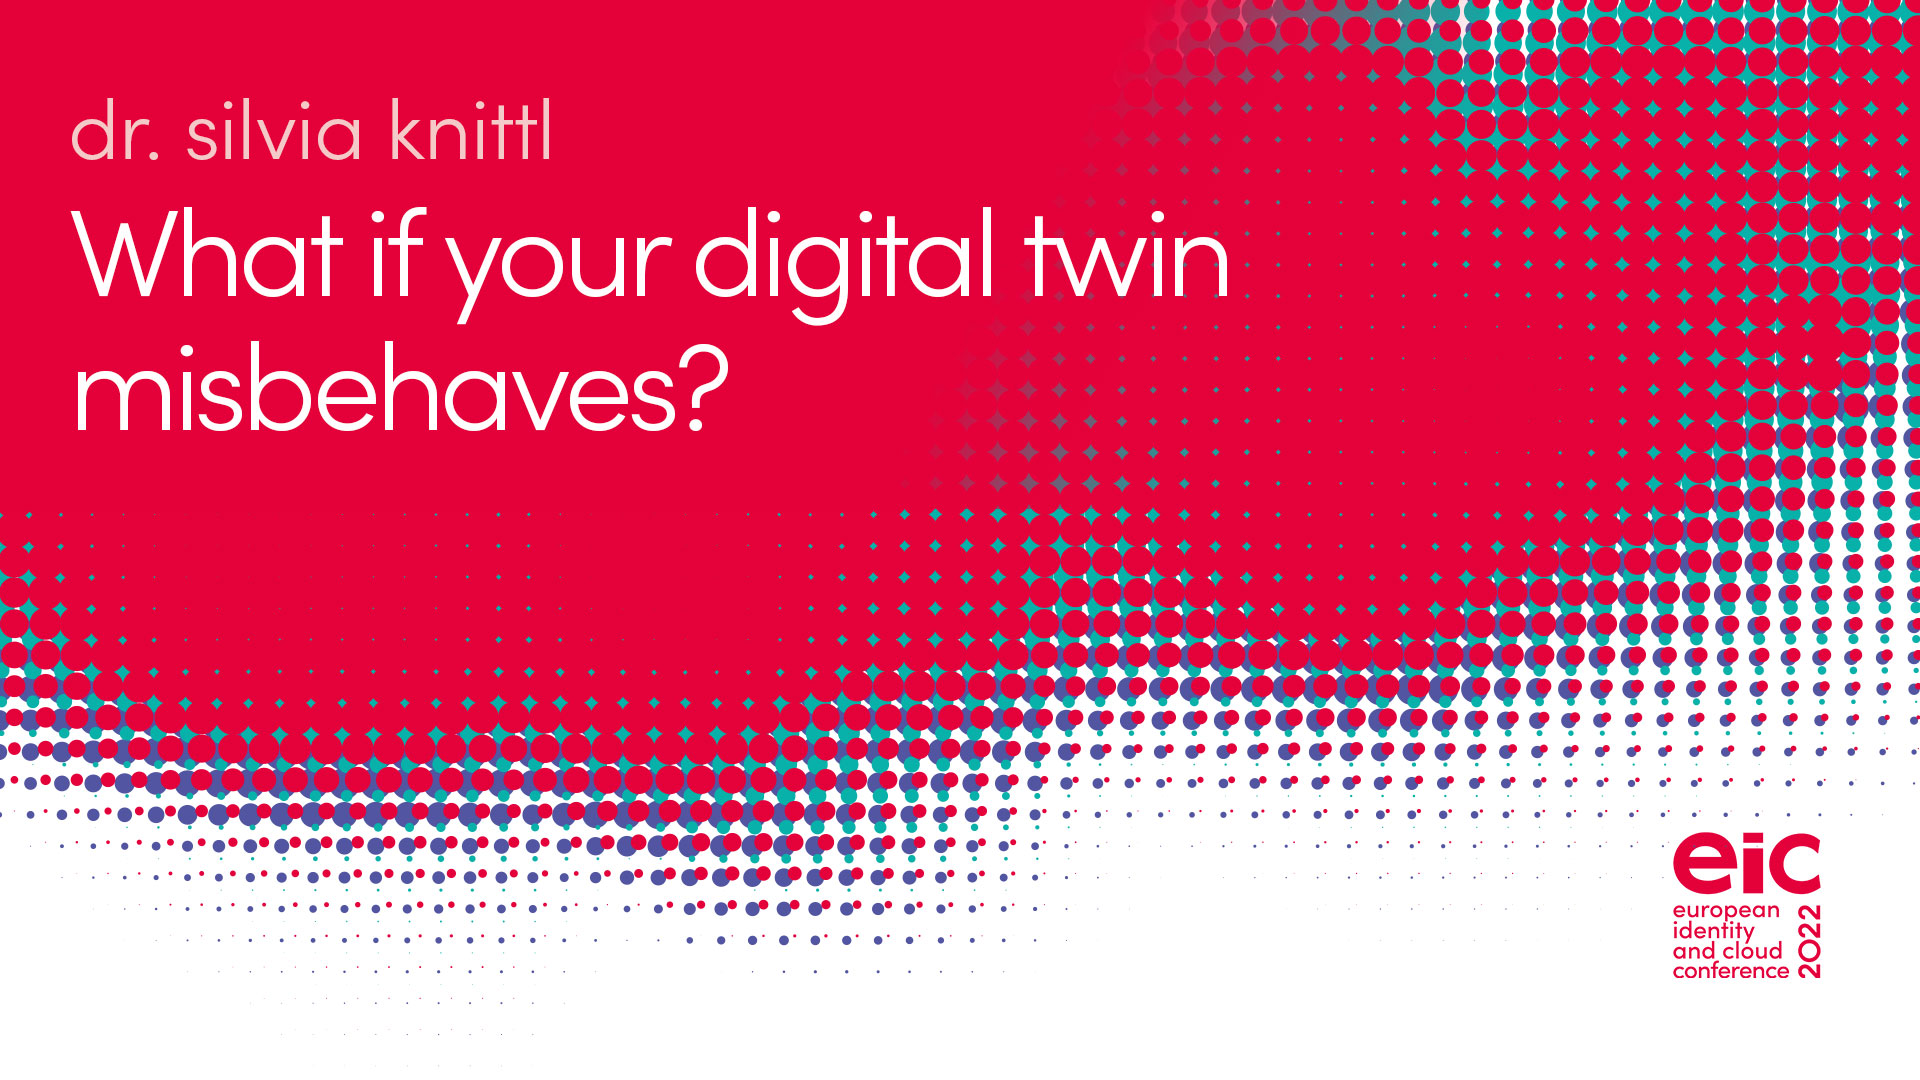 What if your digital twin misbehaves?